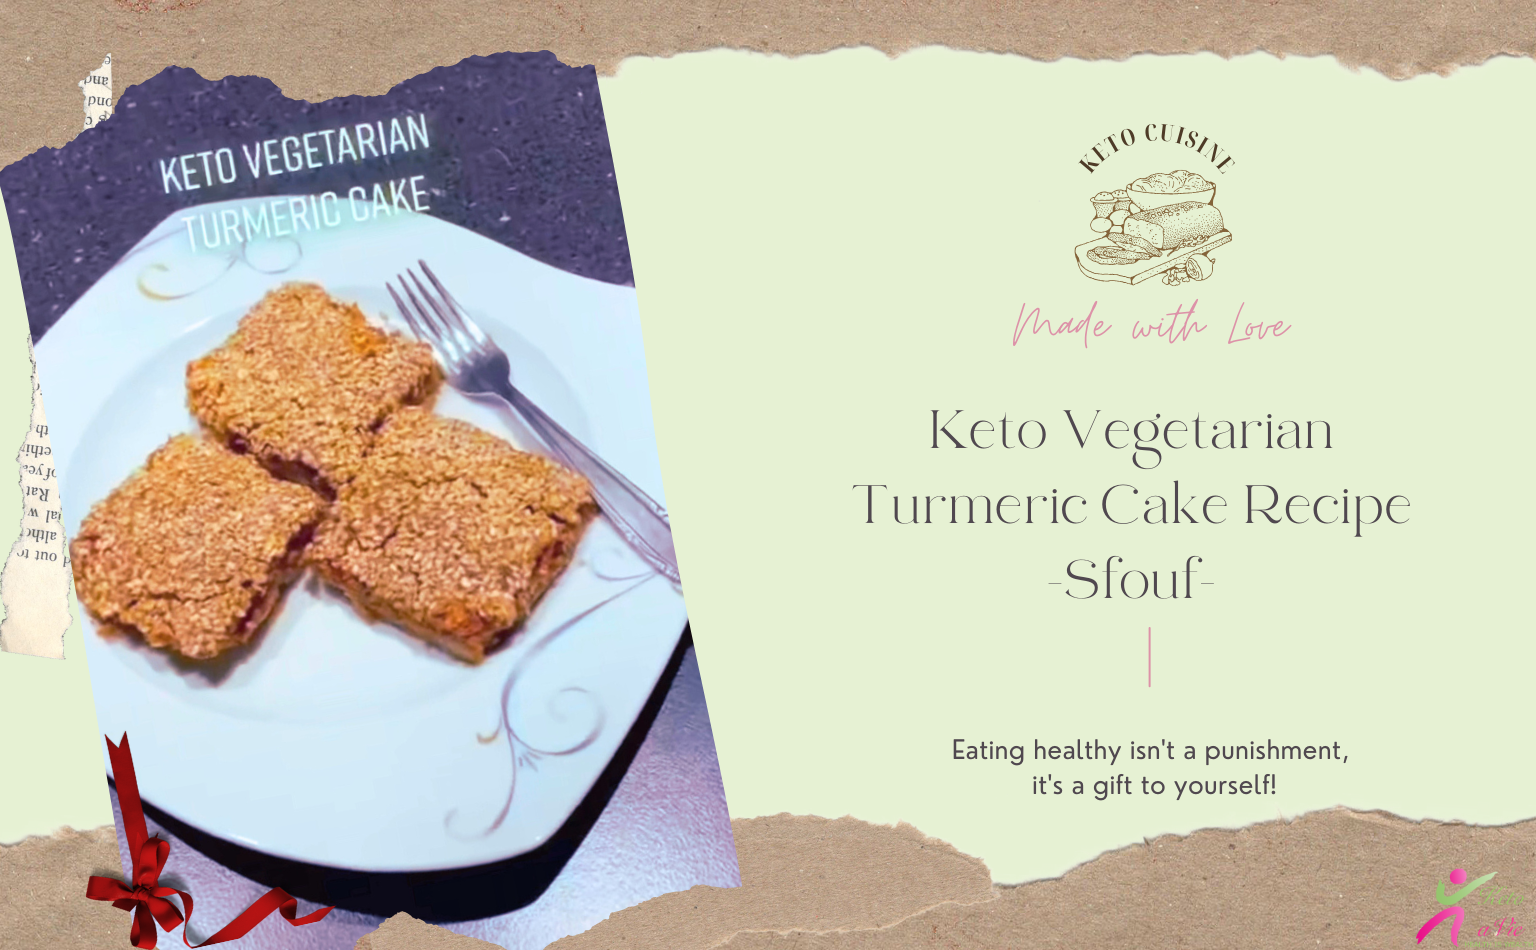 A beautifully plated slice of the Keto Vegetarian Turmeric Cake, highlighting its golden hue and sprinkled sesame seeds on top